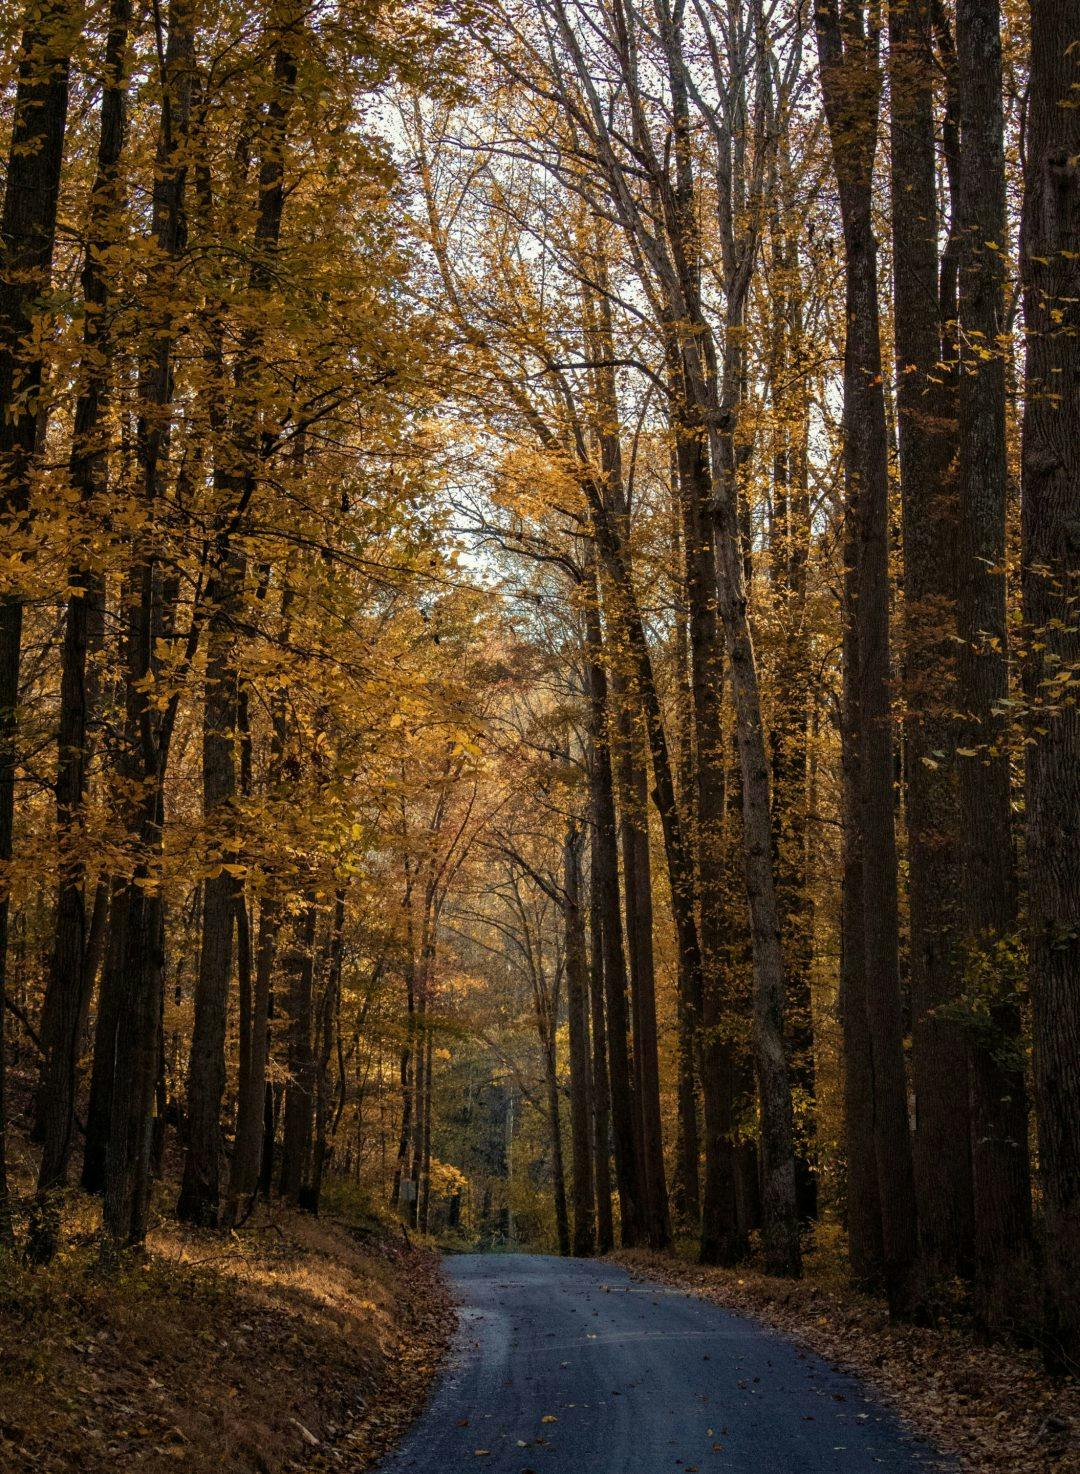 A country road lined with tall trees